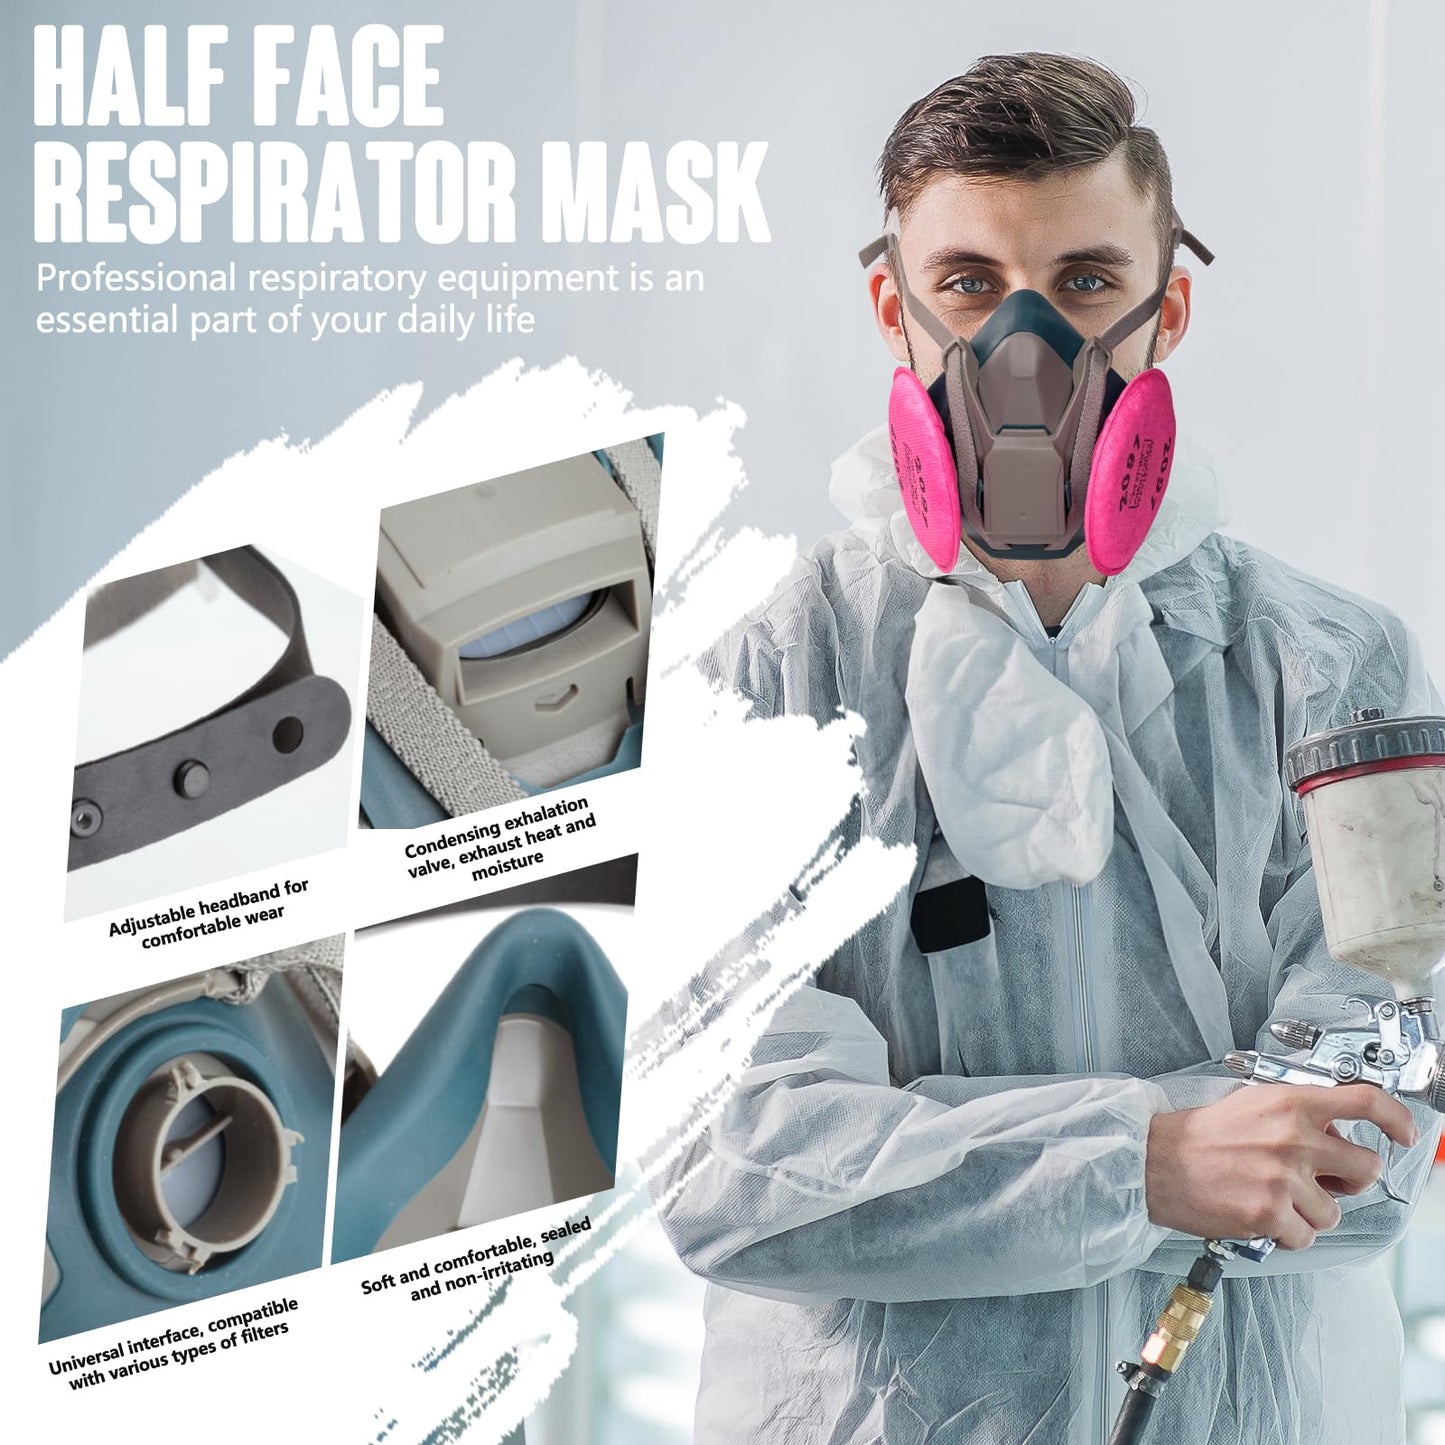 Urjoai Quick Latch Half Mask Respirator 6502QL - Reusable Respirator Mask with 2097 Filters Against Gases, Dust, Asbestos, Lead Paint, Fumes, Respirator Mask for Chemicals Epoxy Resin Paint Welding